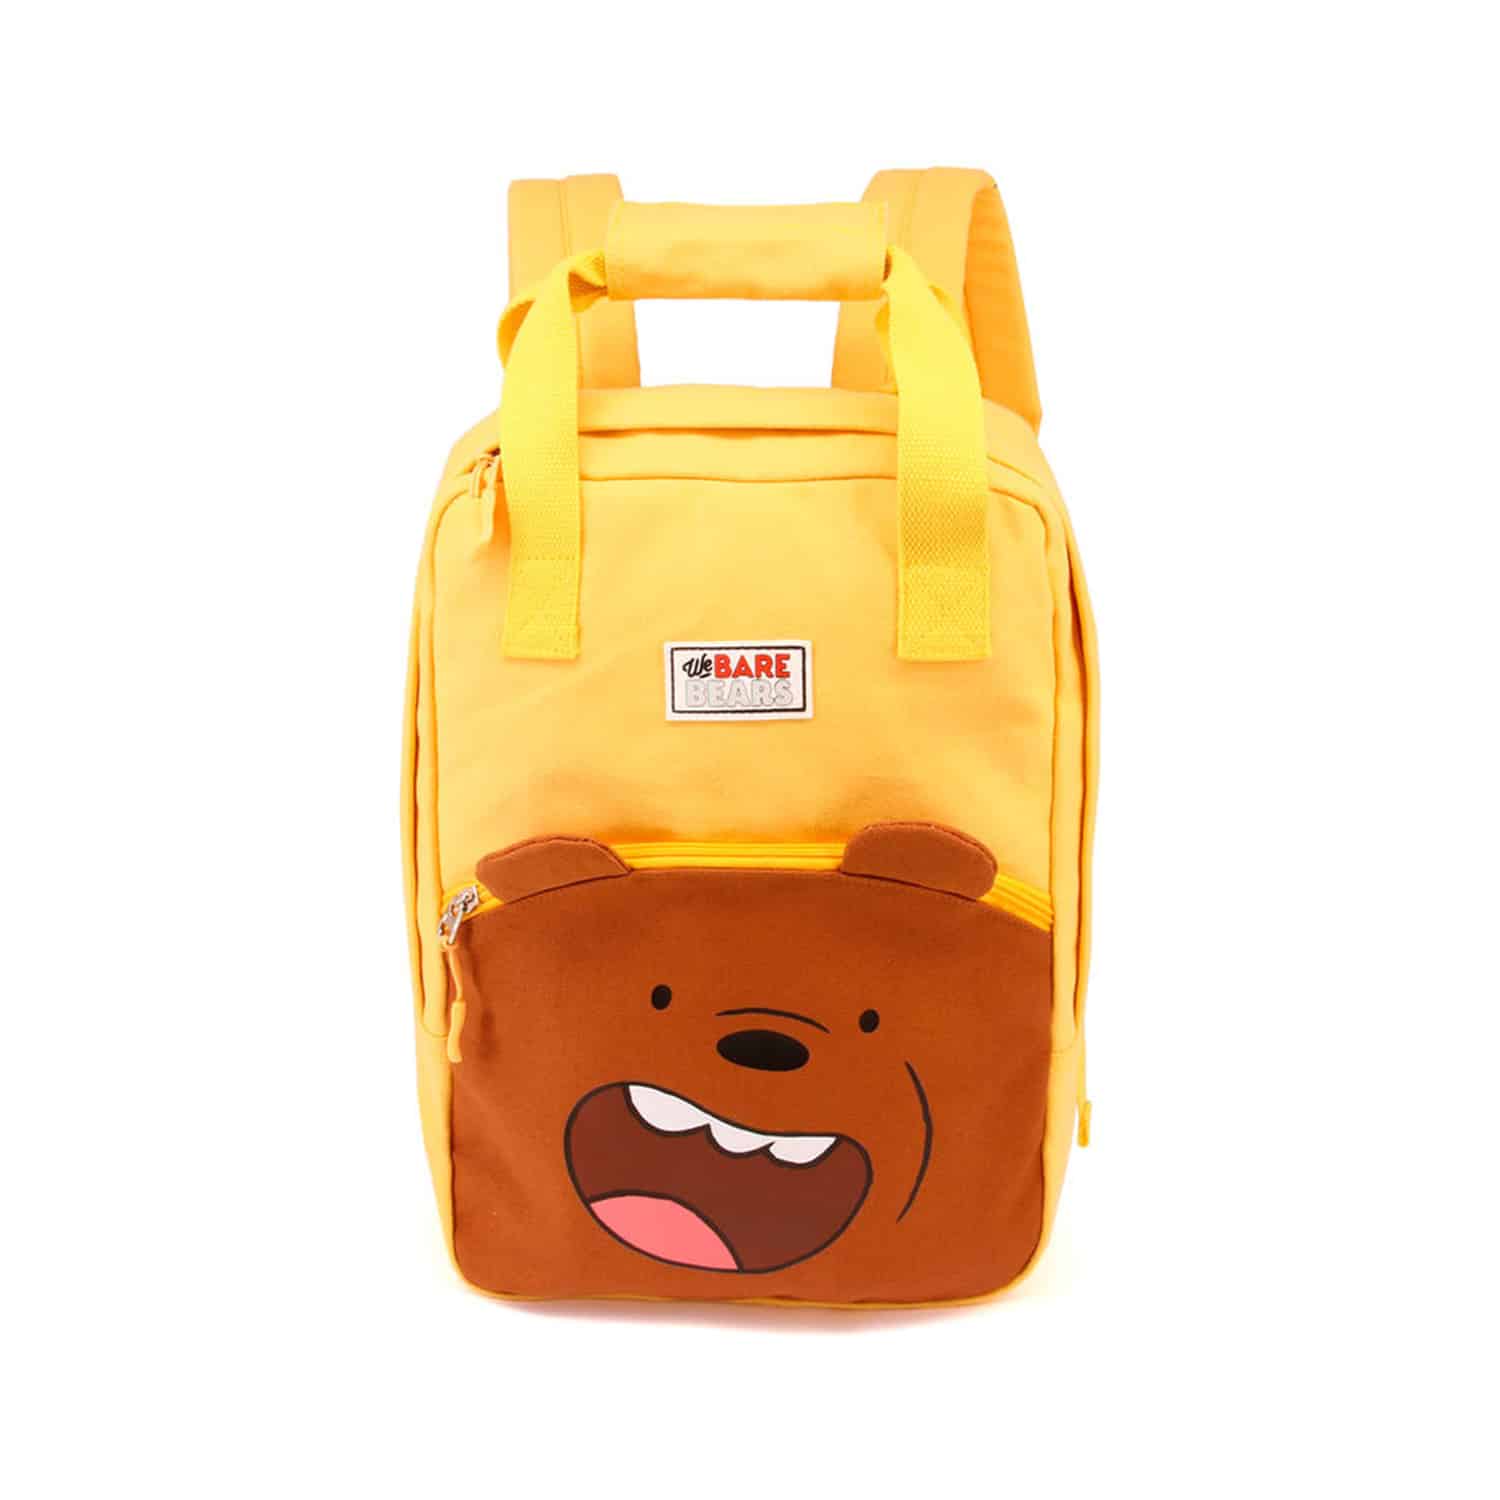 we-bare-bears-grizz-yellow-backpack